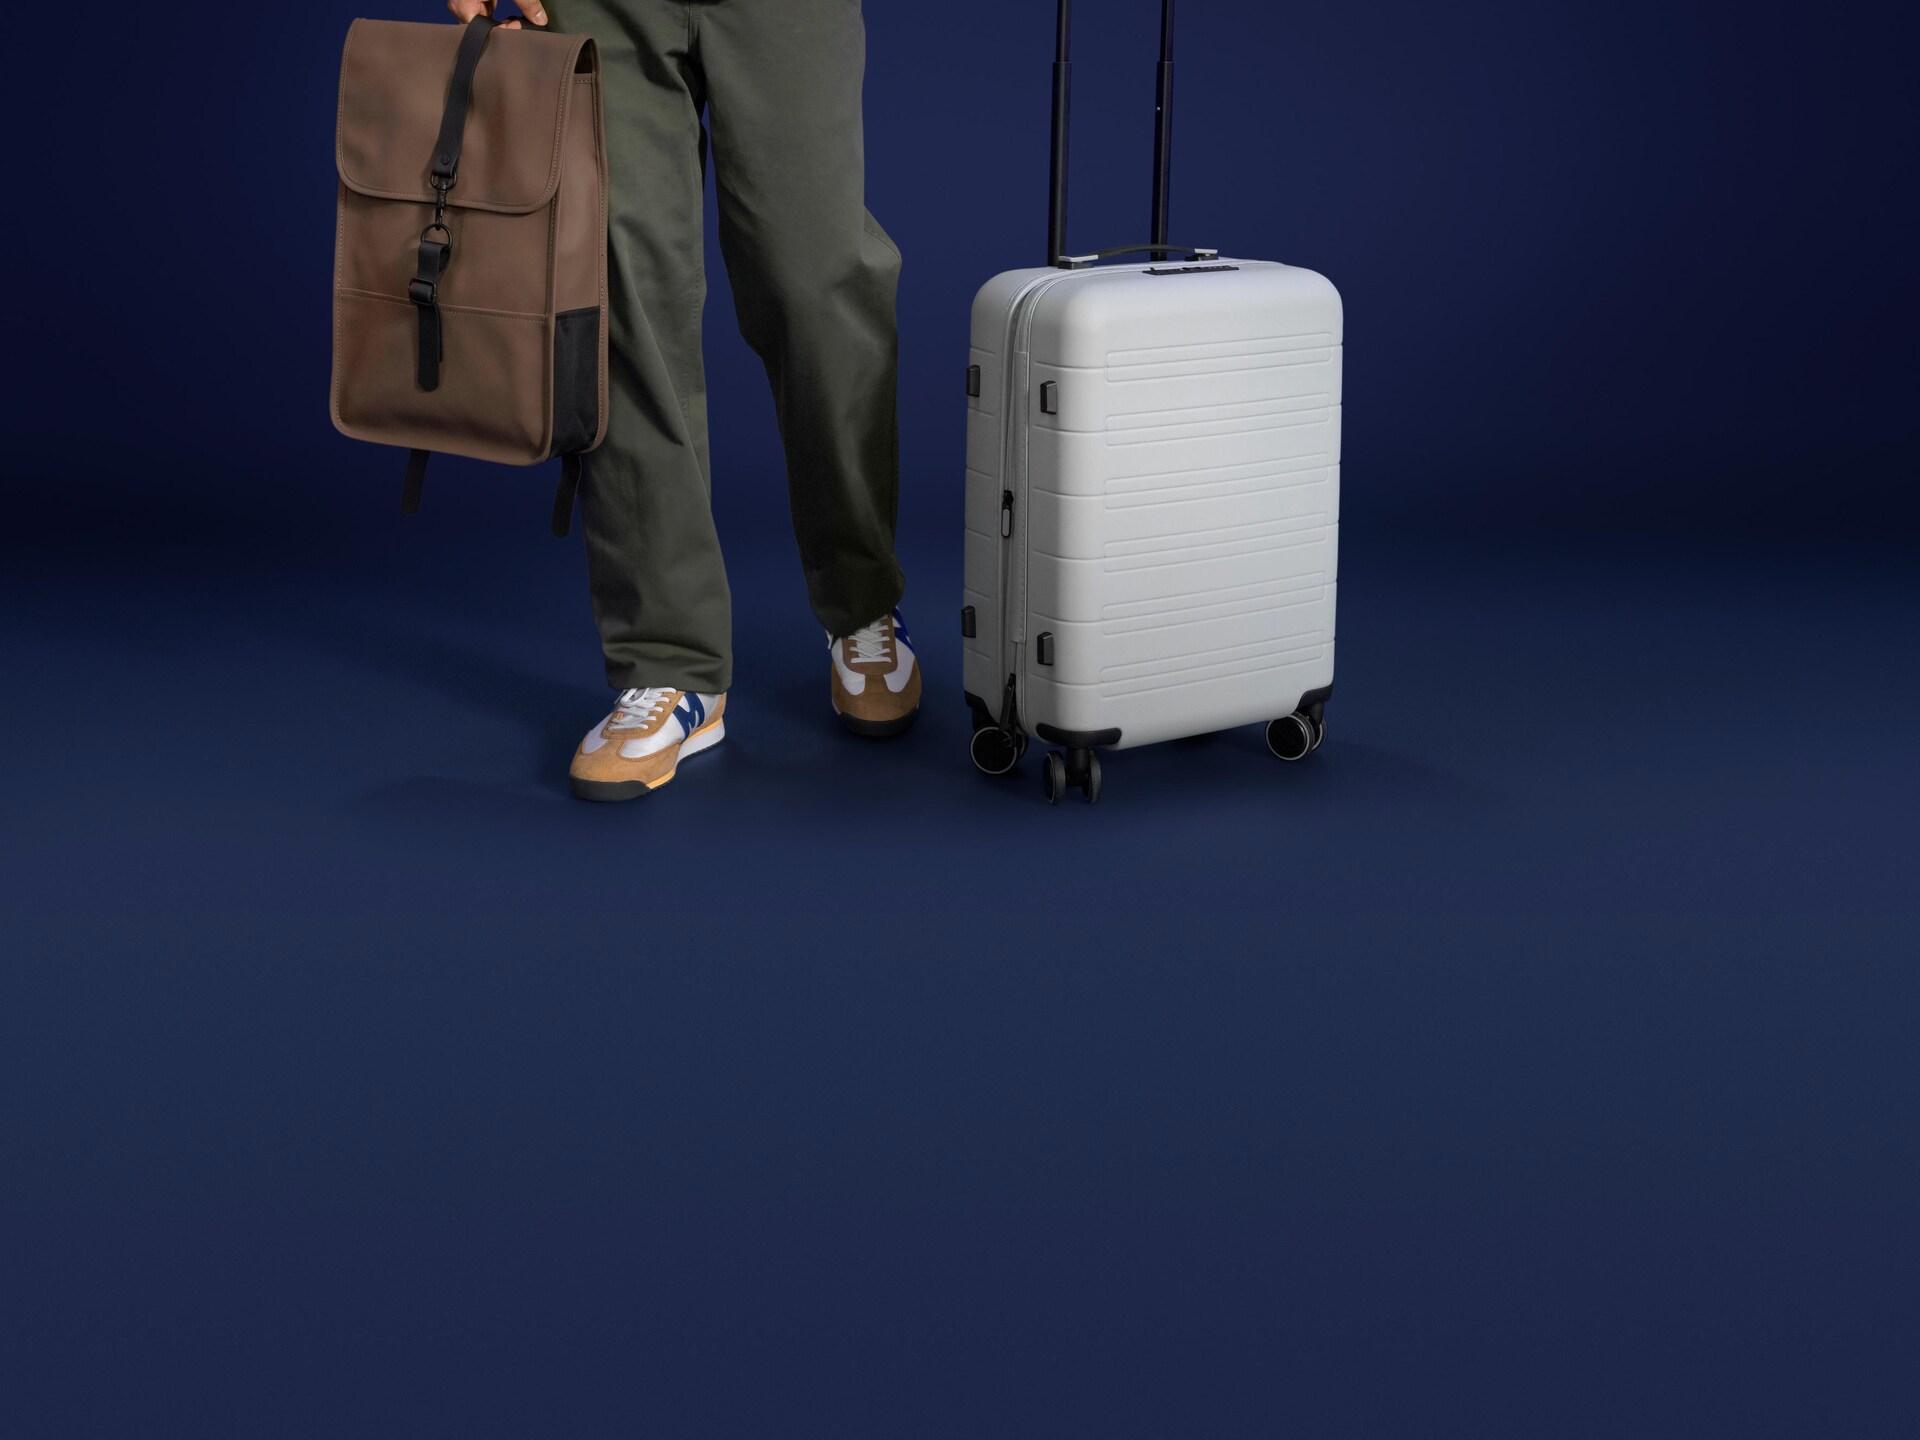 A person wearing sneakers, khaki pants, and a brown bag stands next to a silver suitcase.